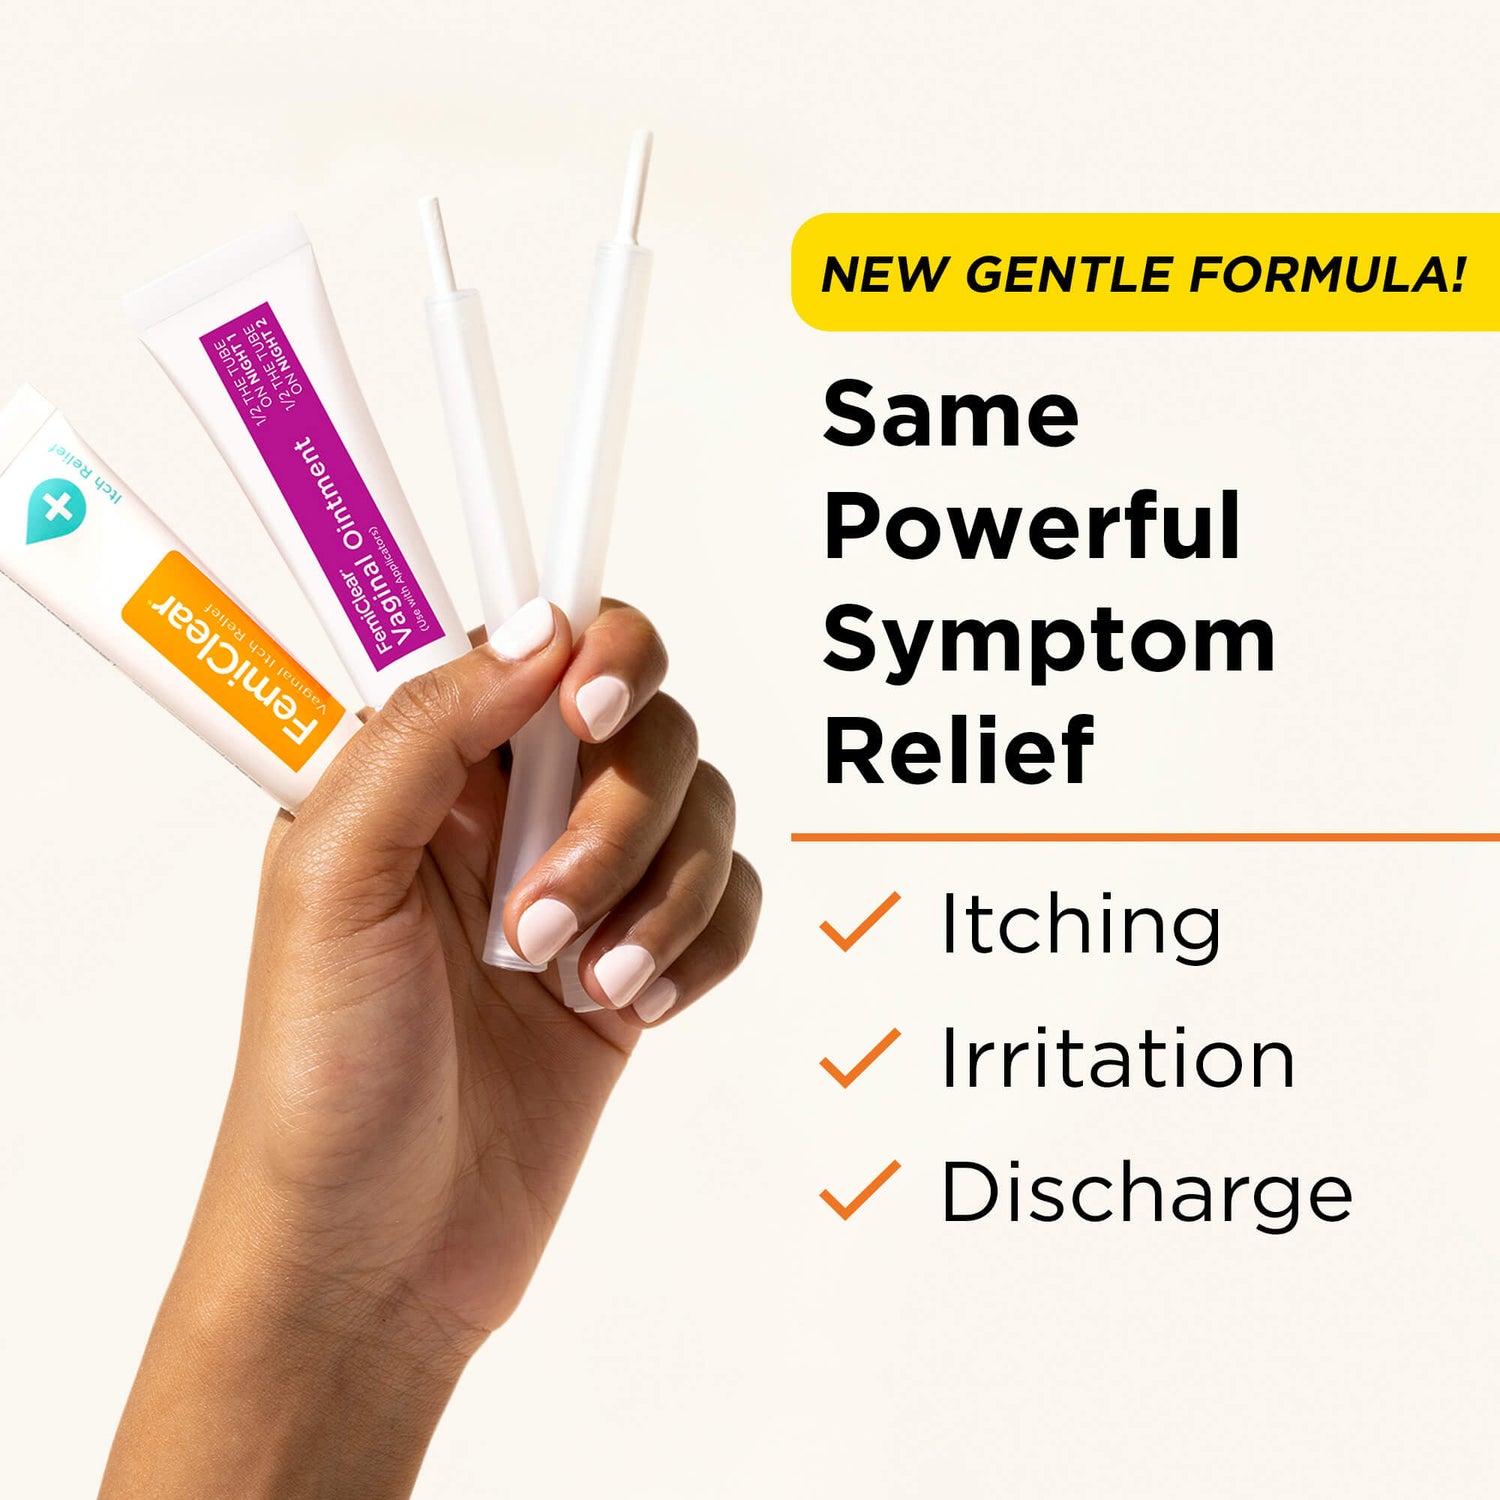 New Gentle Formula! Same powerful symptom relief. Relieves itching, irritation, and discharge